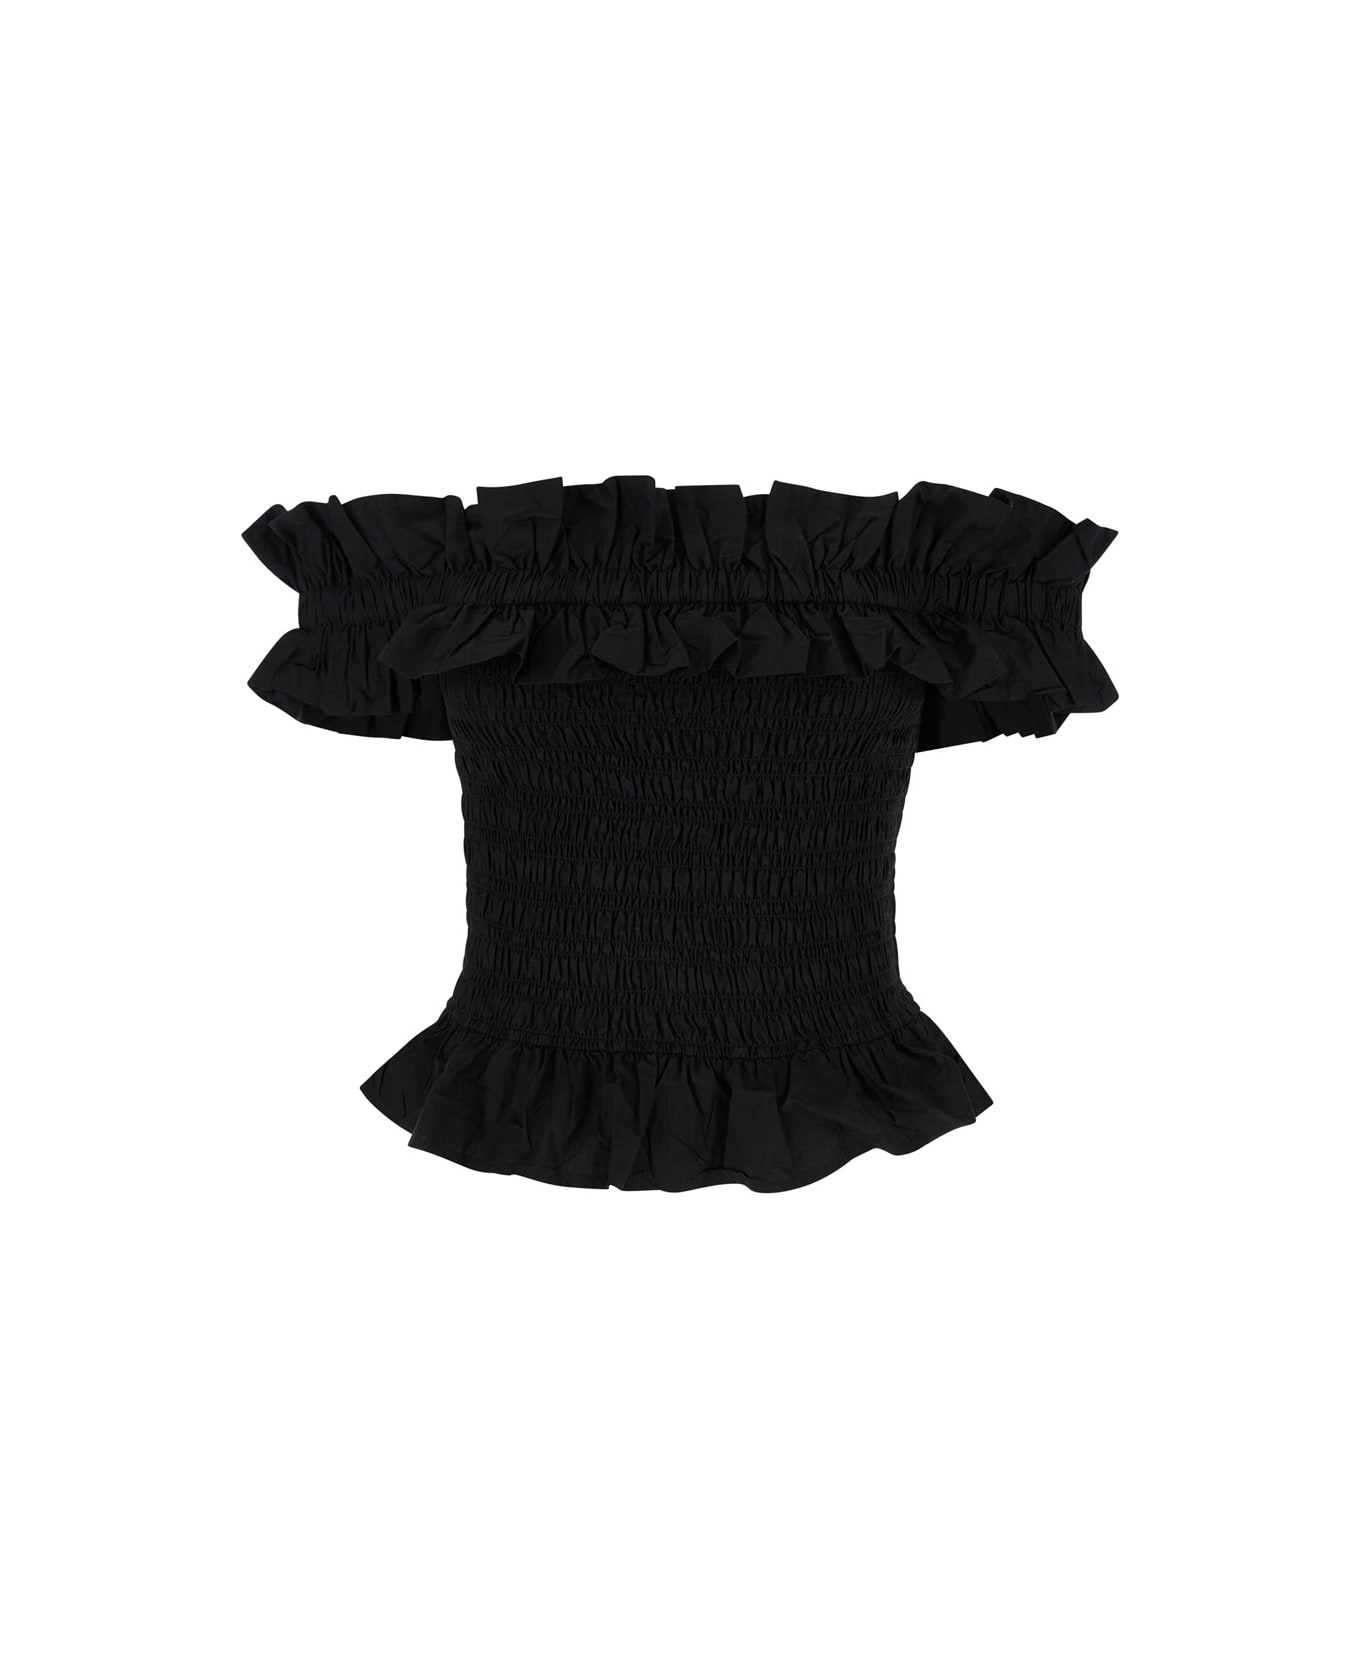 Ganni Top With Bare Shoulders - Black トップス